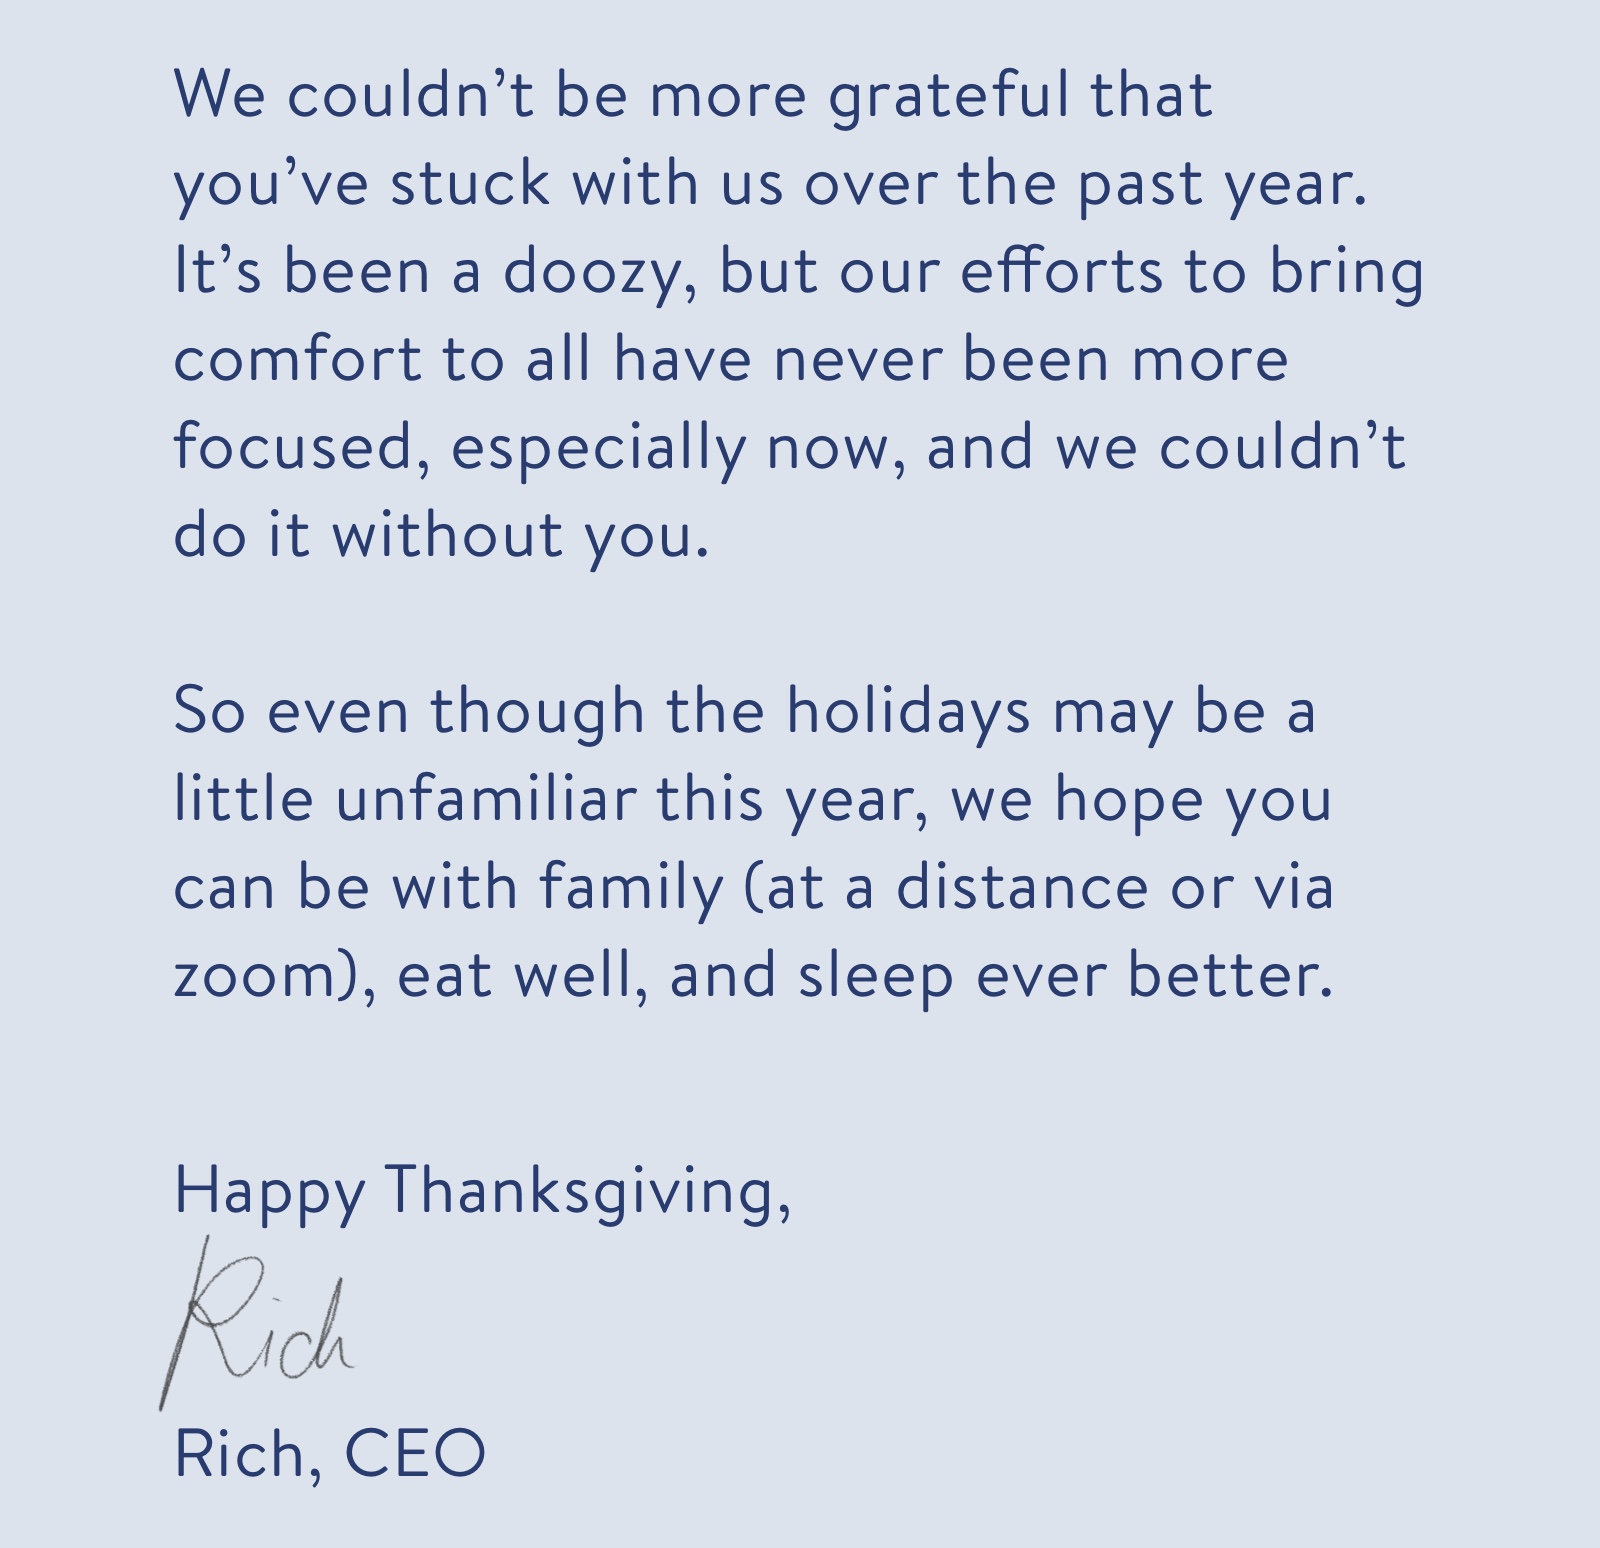 We couldn't be more grateful that you've stuck with us over the past year. It's been a doozy, but our efforts to bring comfort to all have never been more focused, especially now, and we couldn't do it without you. So even though the holidays may be a little unfamiliar this year, we hope you can be with family (at a distance or via zoom), eat well, and sleep ever better.